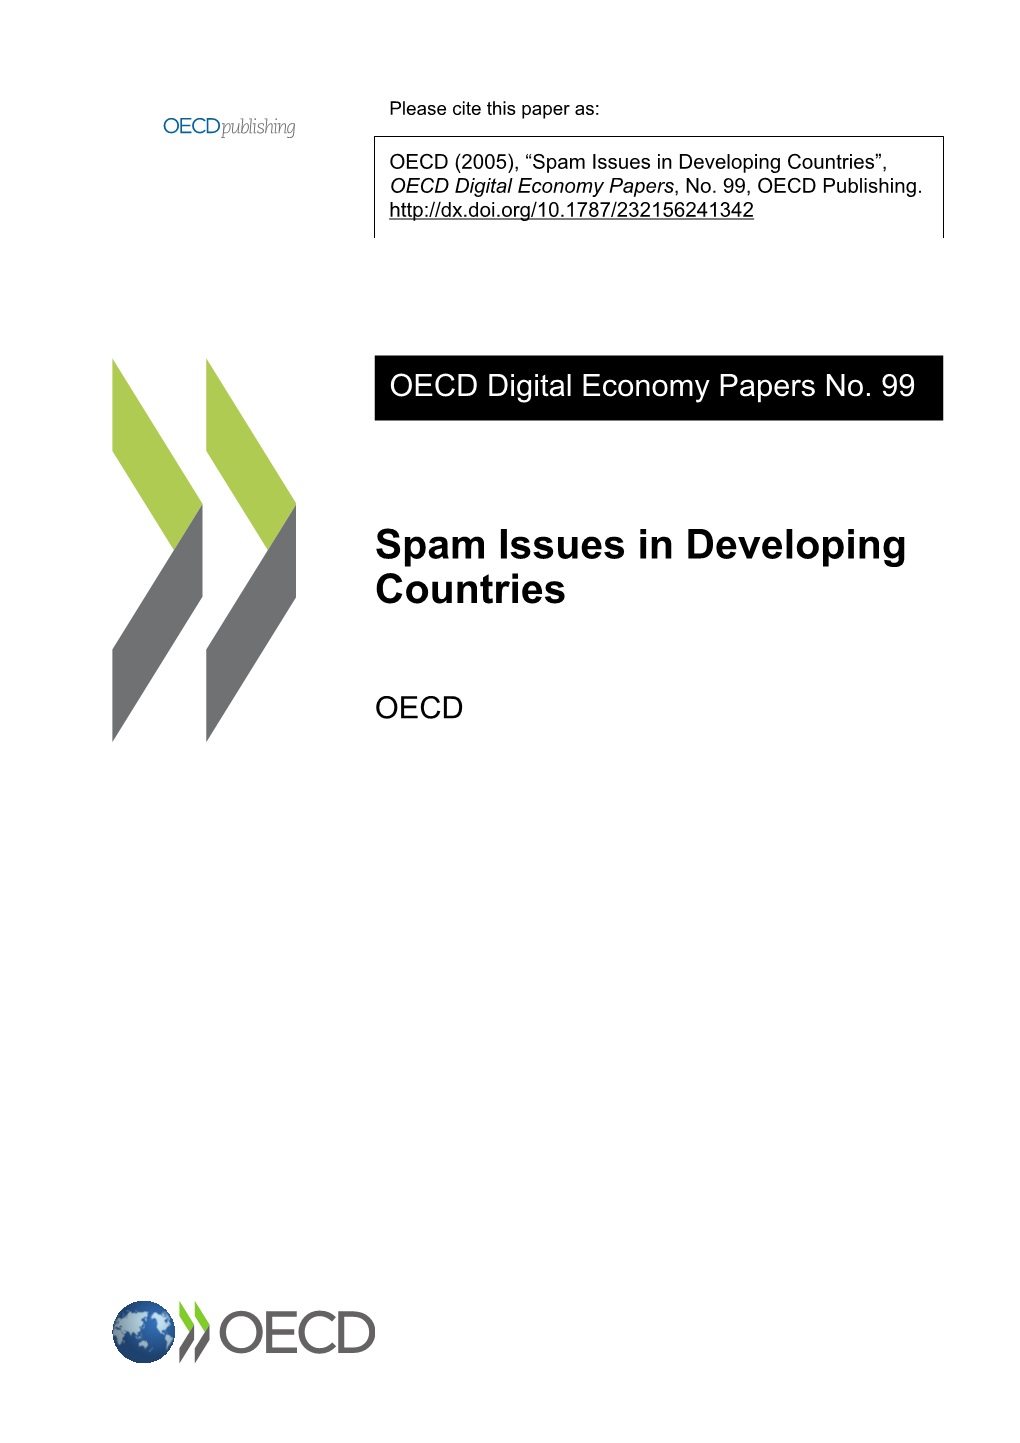 Spam Issues in Developing Countries”, OECD Digital Economy Papers, No